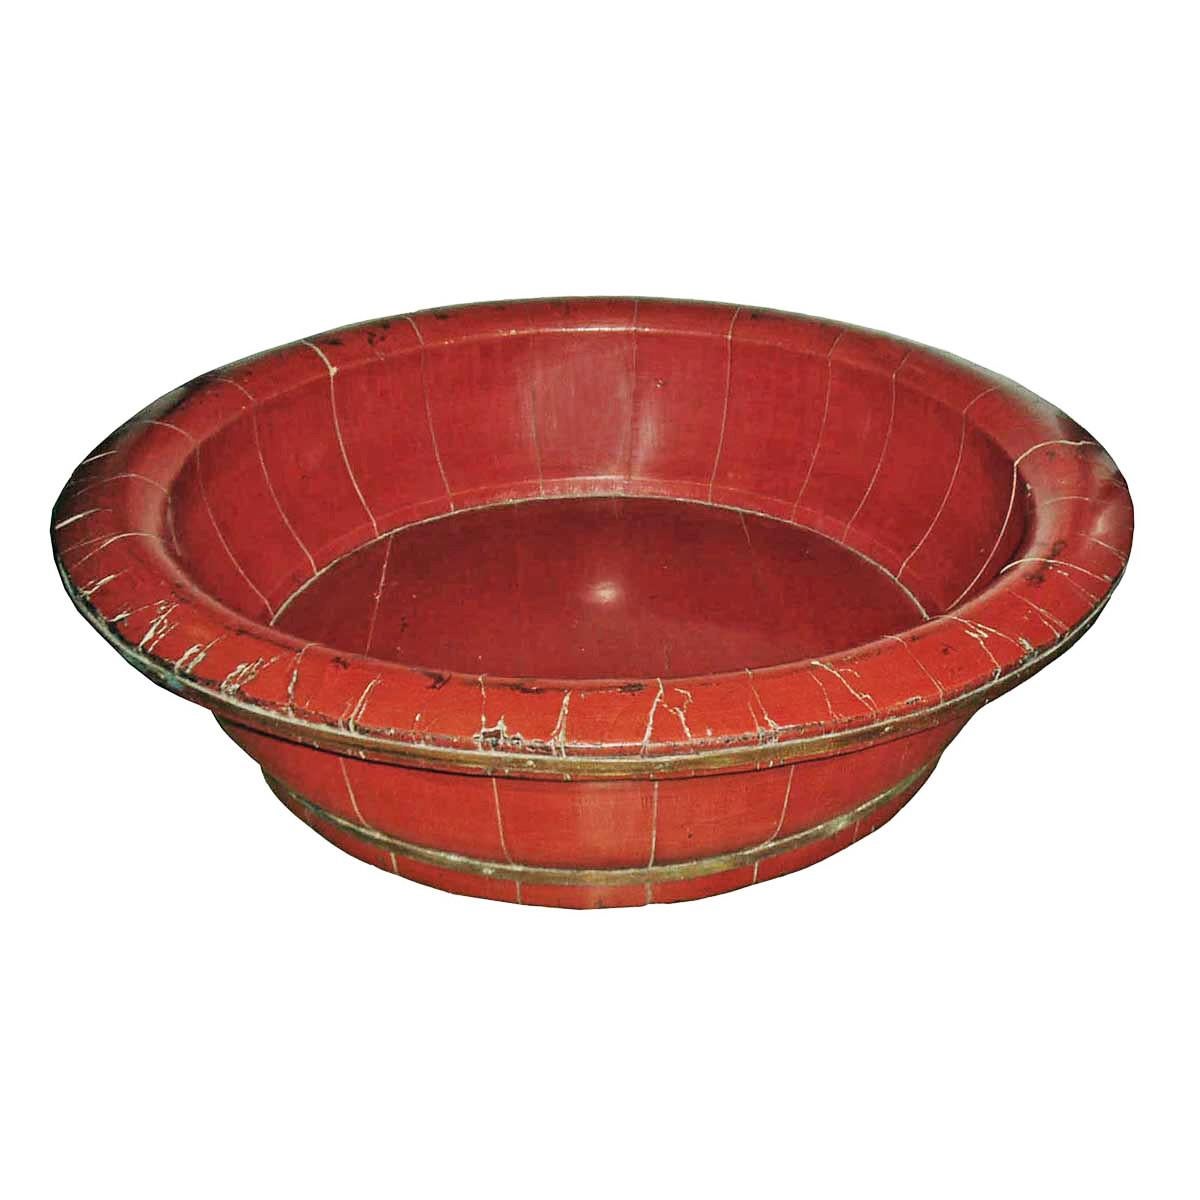 19th Century Lacquered Wood Basin or Bowl